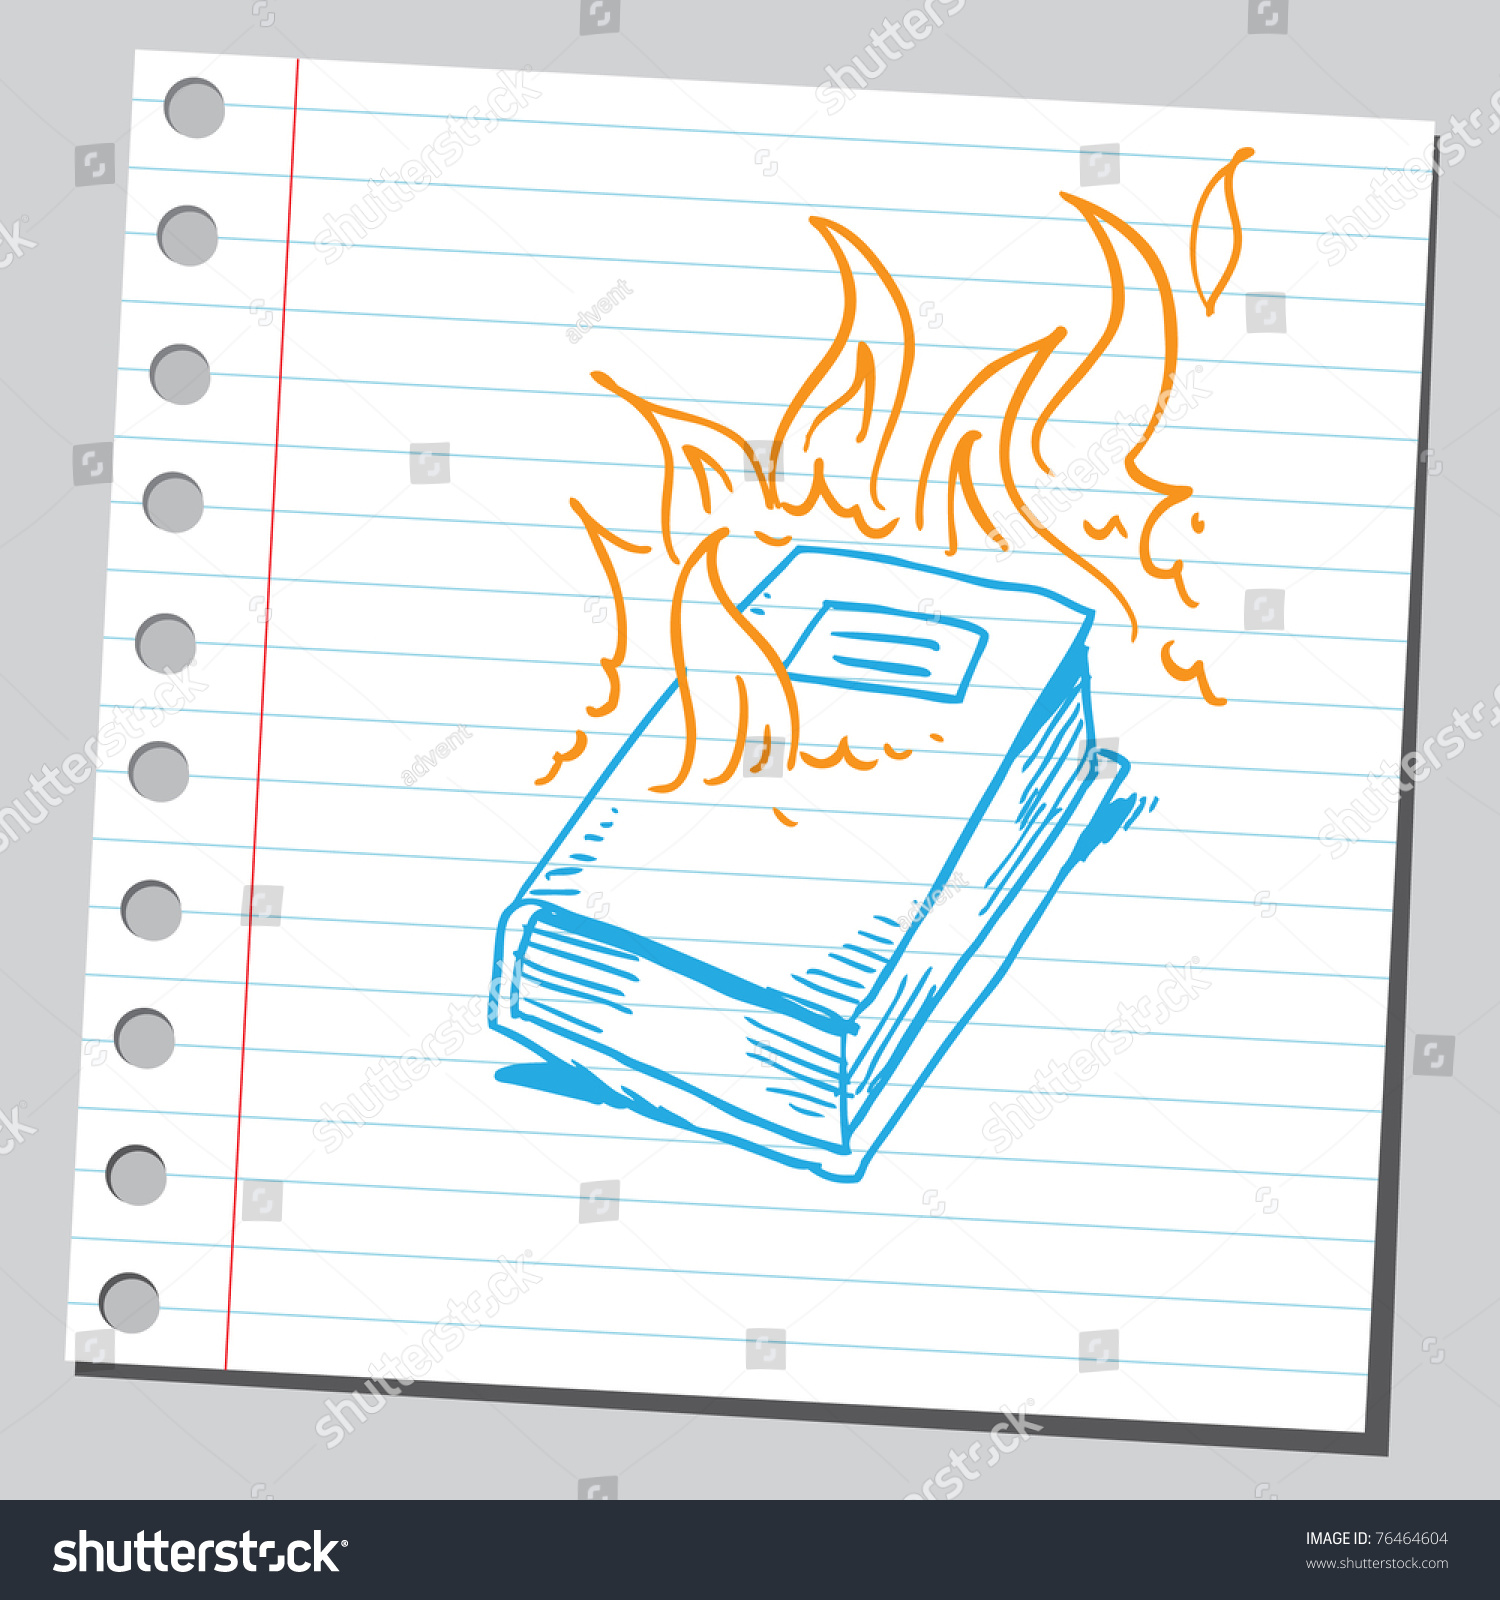 Drawing Of A Burning Book Stock Vector Illustration 76464604 Shutterstock